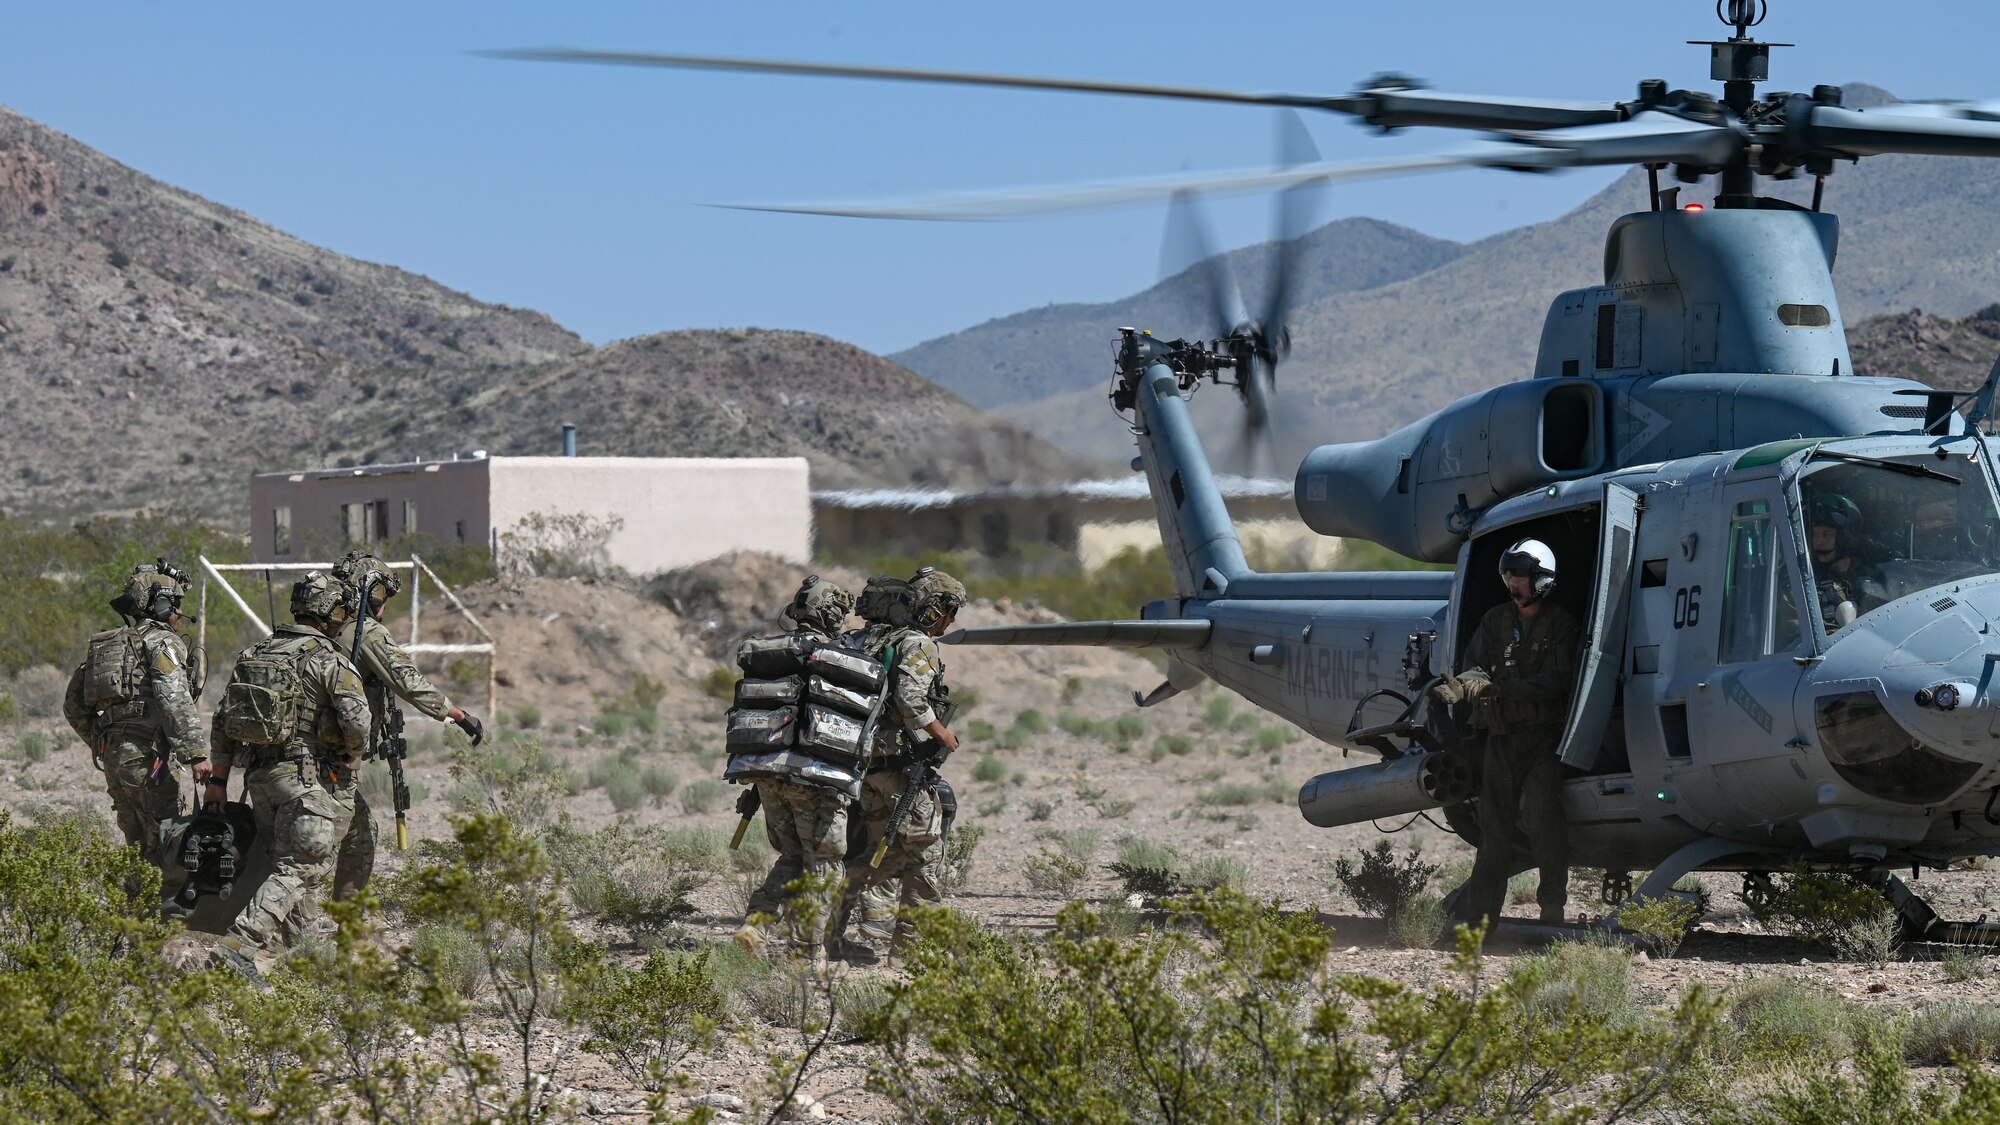 Men in military uniforms carrying equipment board a helicopter,